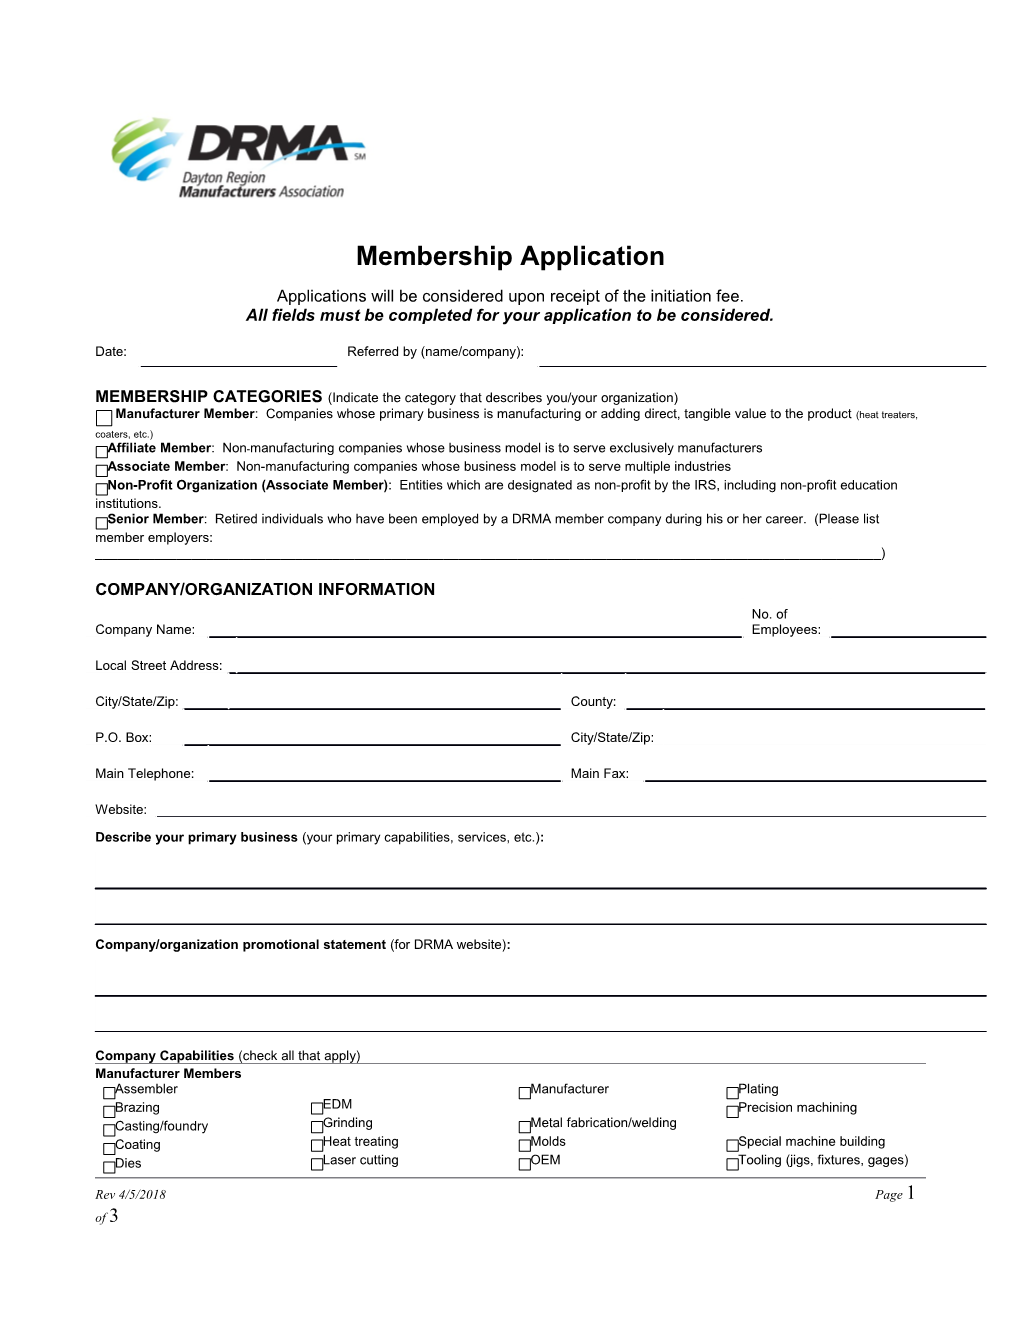 All Fields Must Be Completed for Your Application to Be Considered